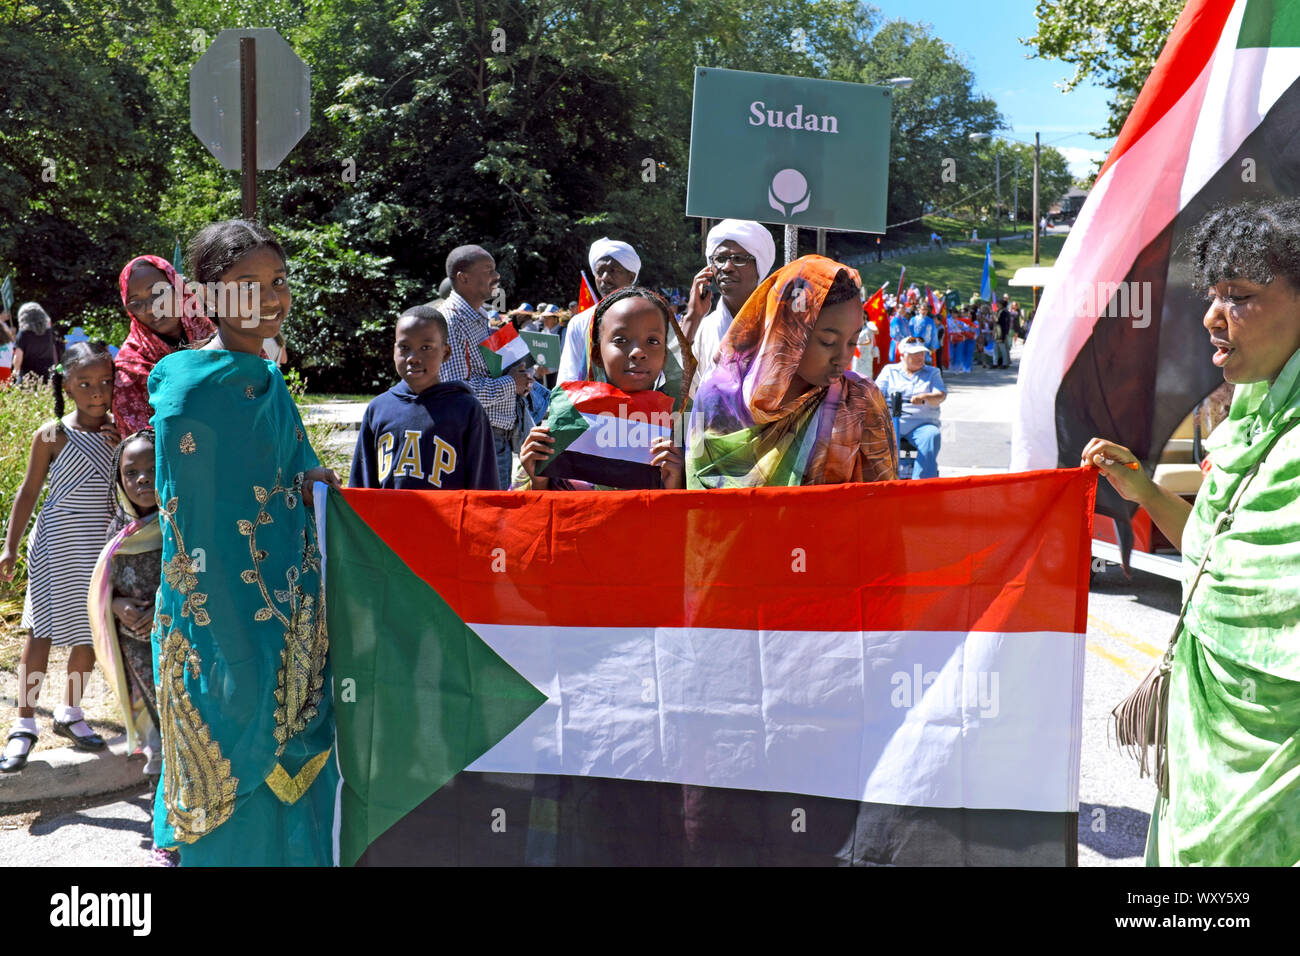 A group representing the Sudanese immigrant community of Cleveland, Ohio, USA hold the Sudan flag while dressed in traditional clothing. Stock Photo